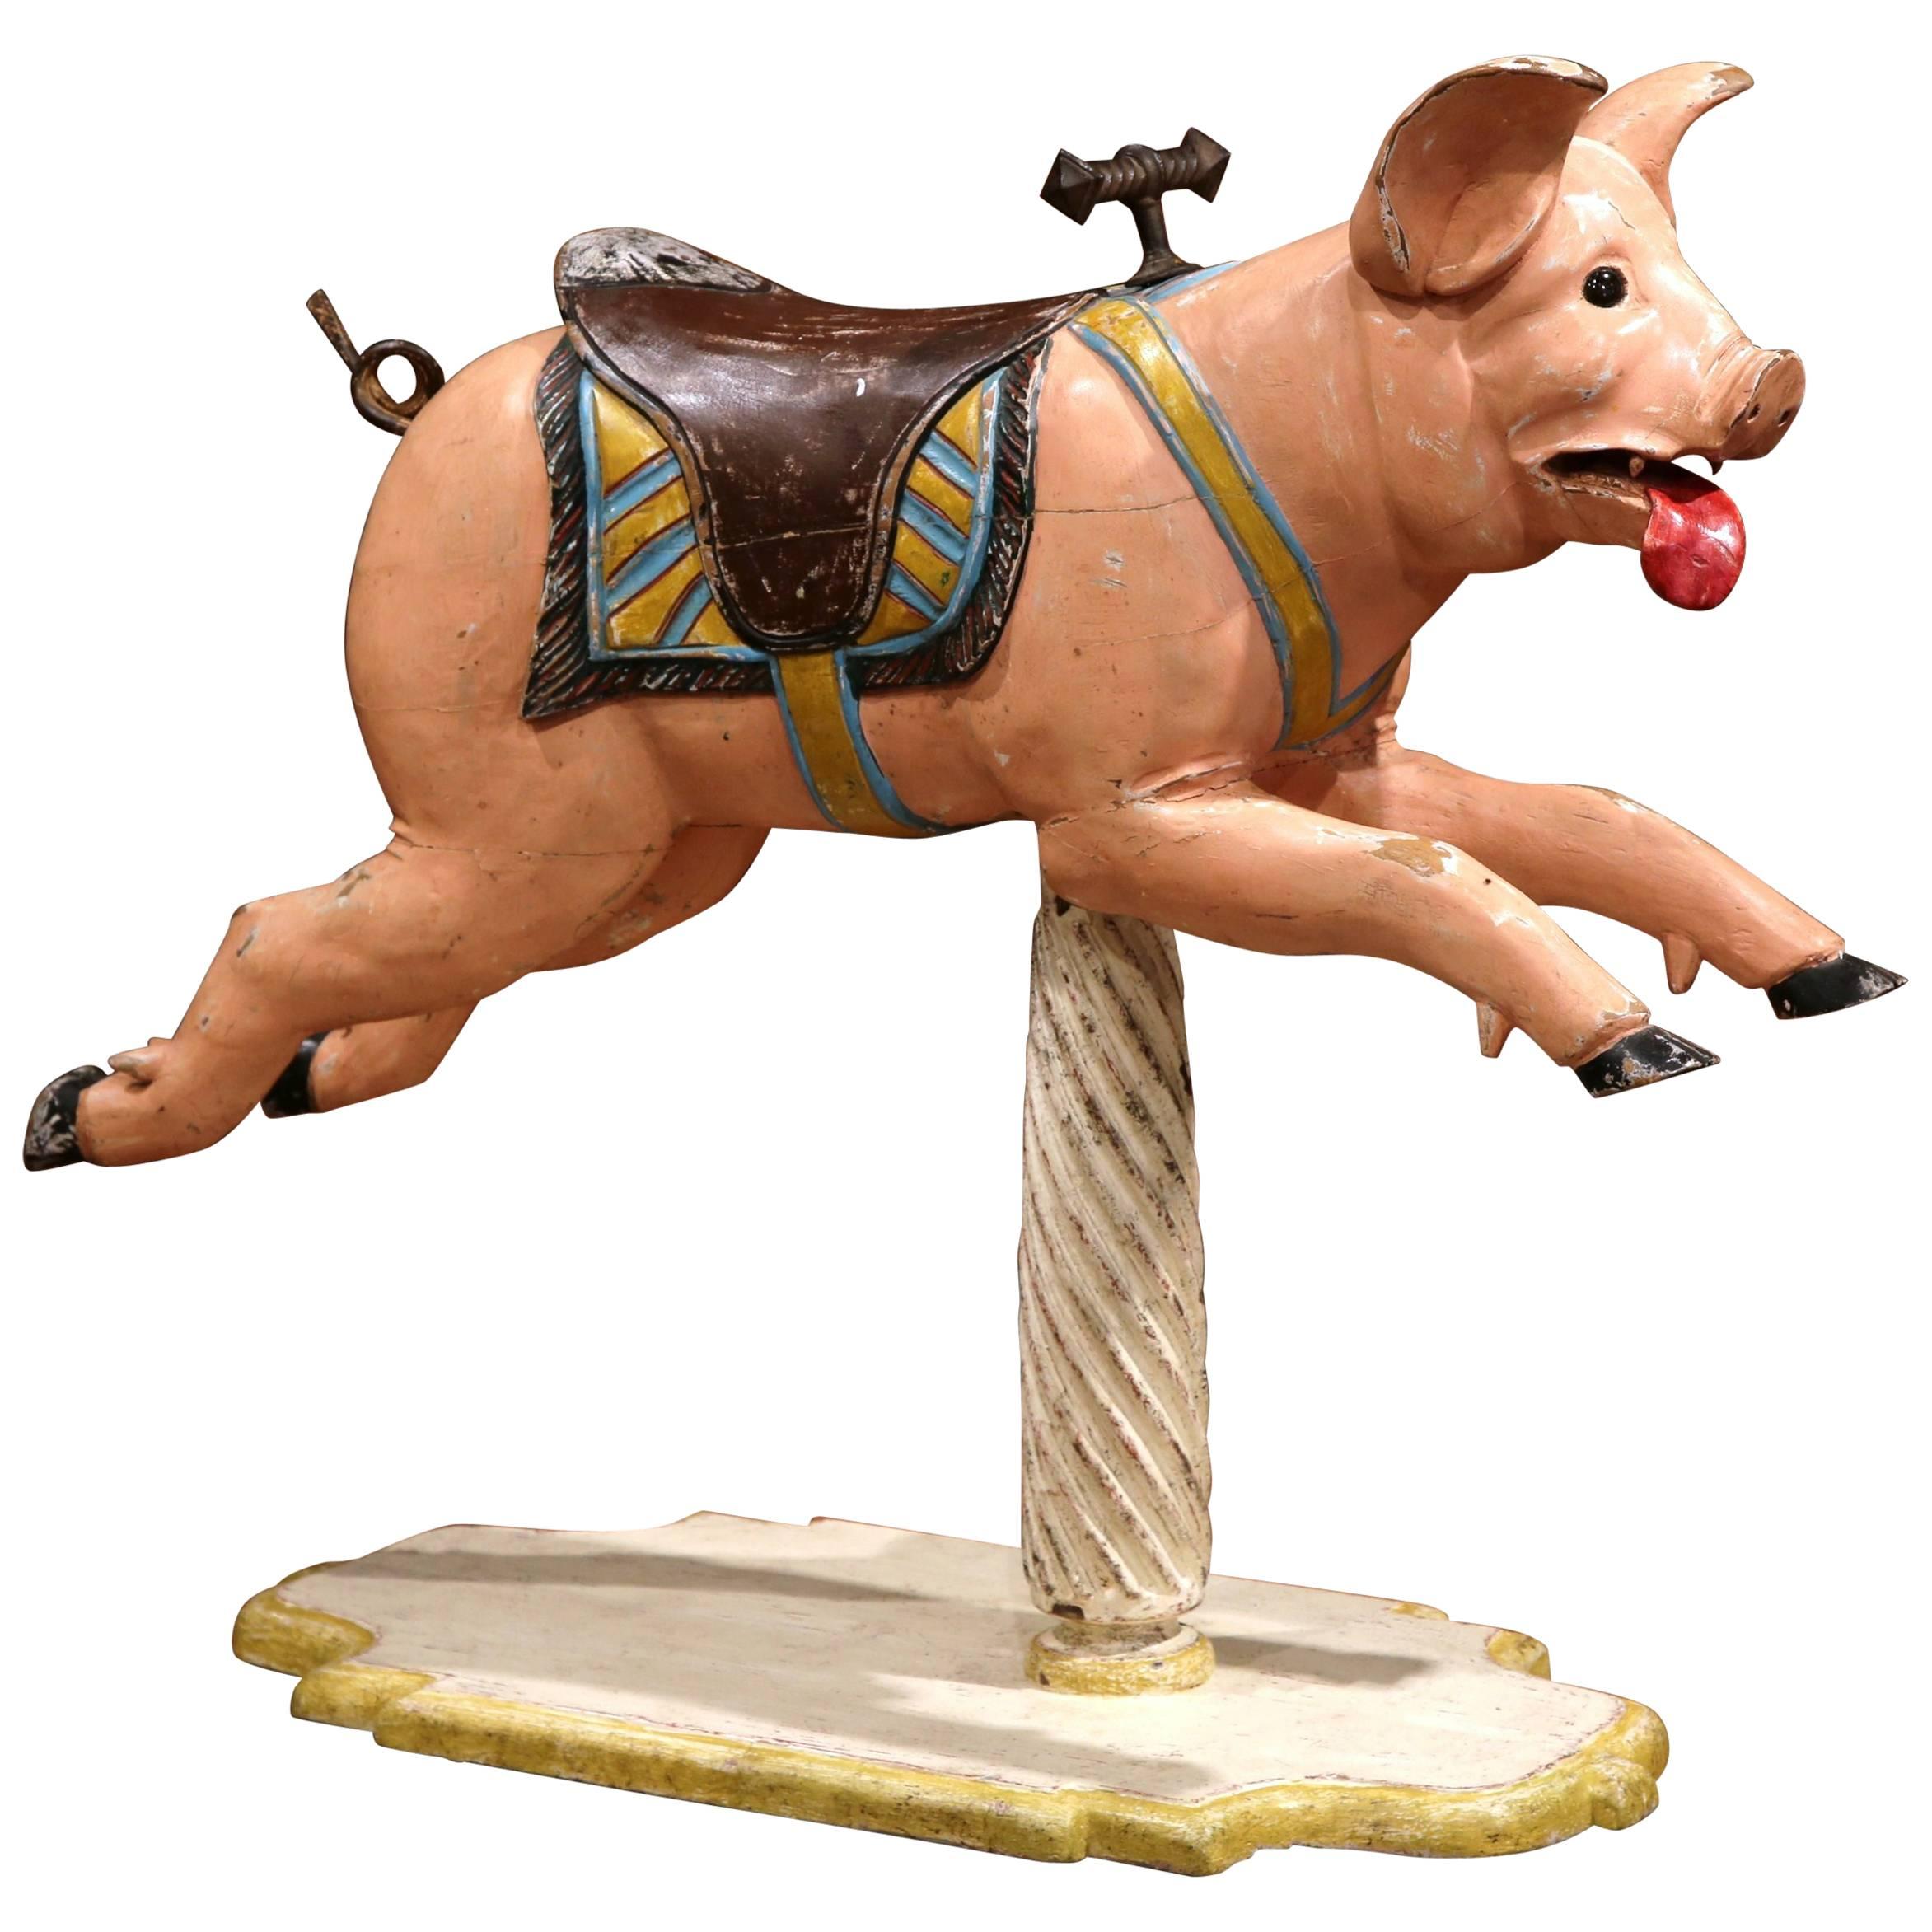 Incorporate old world charm into your home with this interesting antique, wooden carousel pig sculpture from France, circa 1890. The large pig sculpture sits on a barley twist post, and is decorated with its original polychrome painted finish and